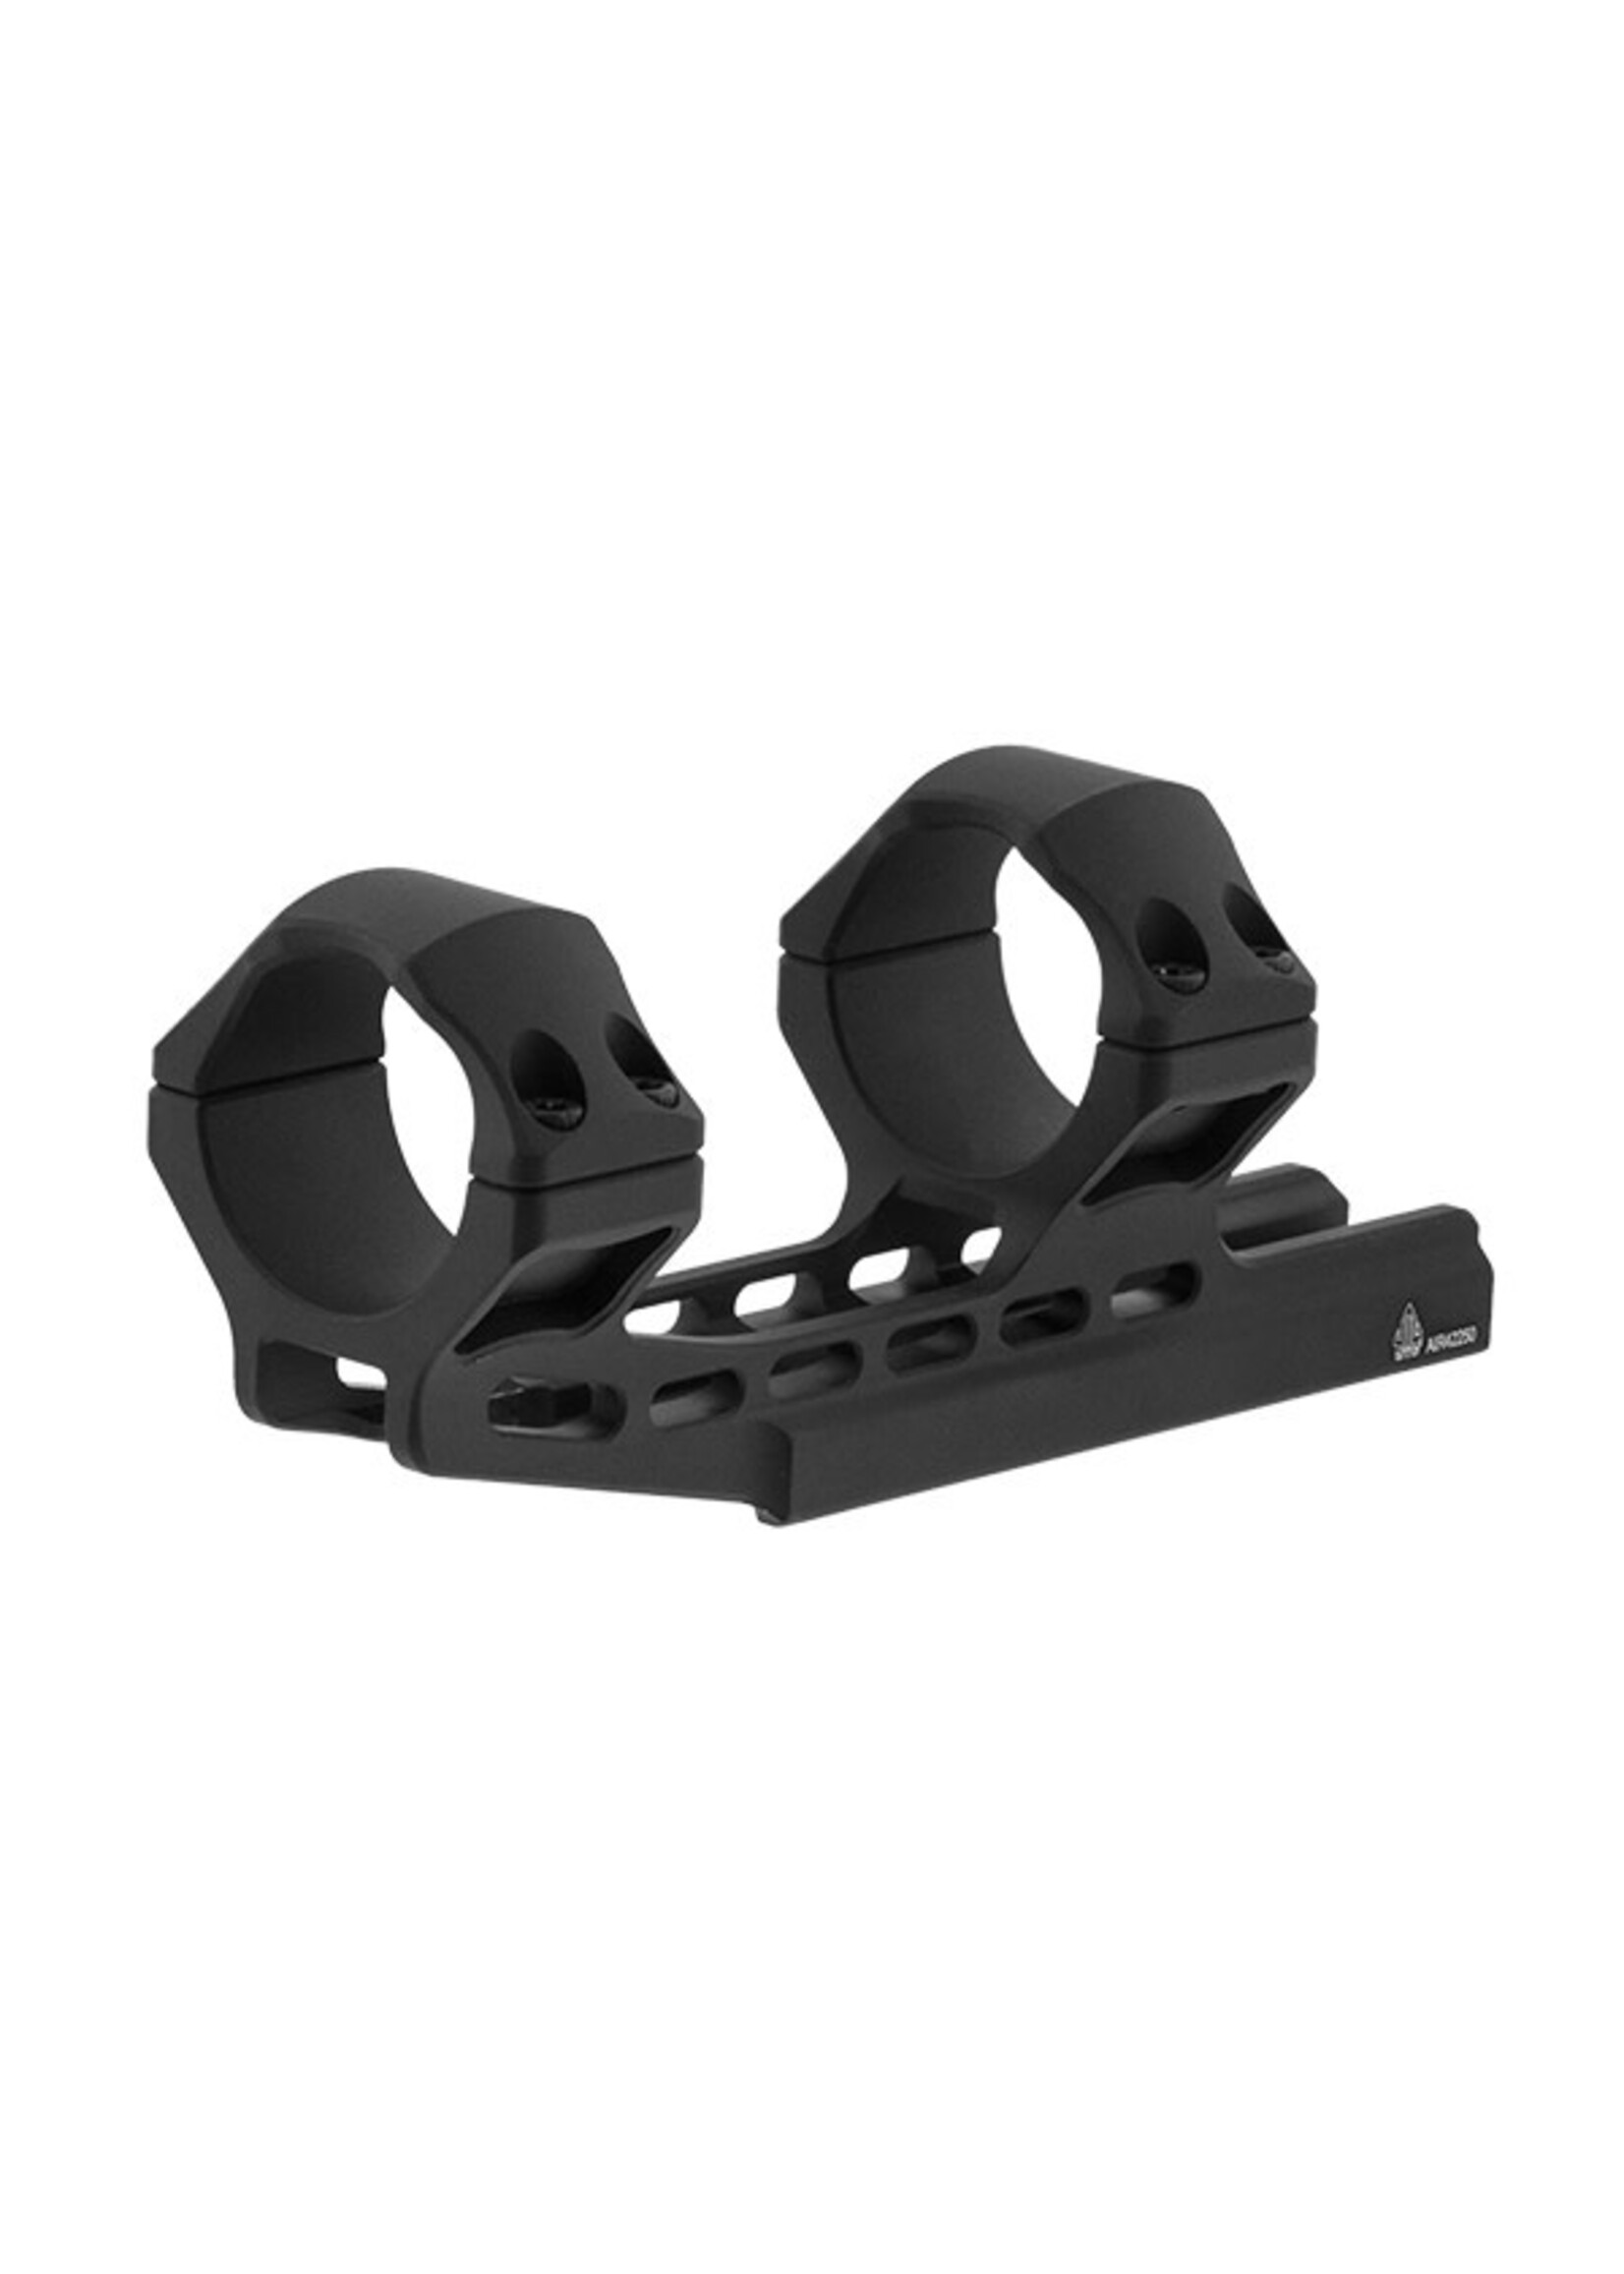 UTG ACCU-SYNC 34MM HIGH PROFILE 50MM OFFSET PICATINNY SCOPE RINGS